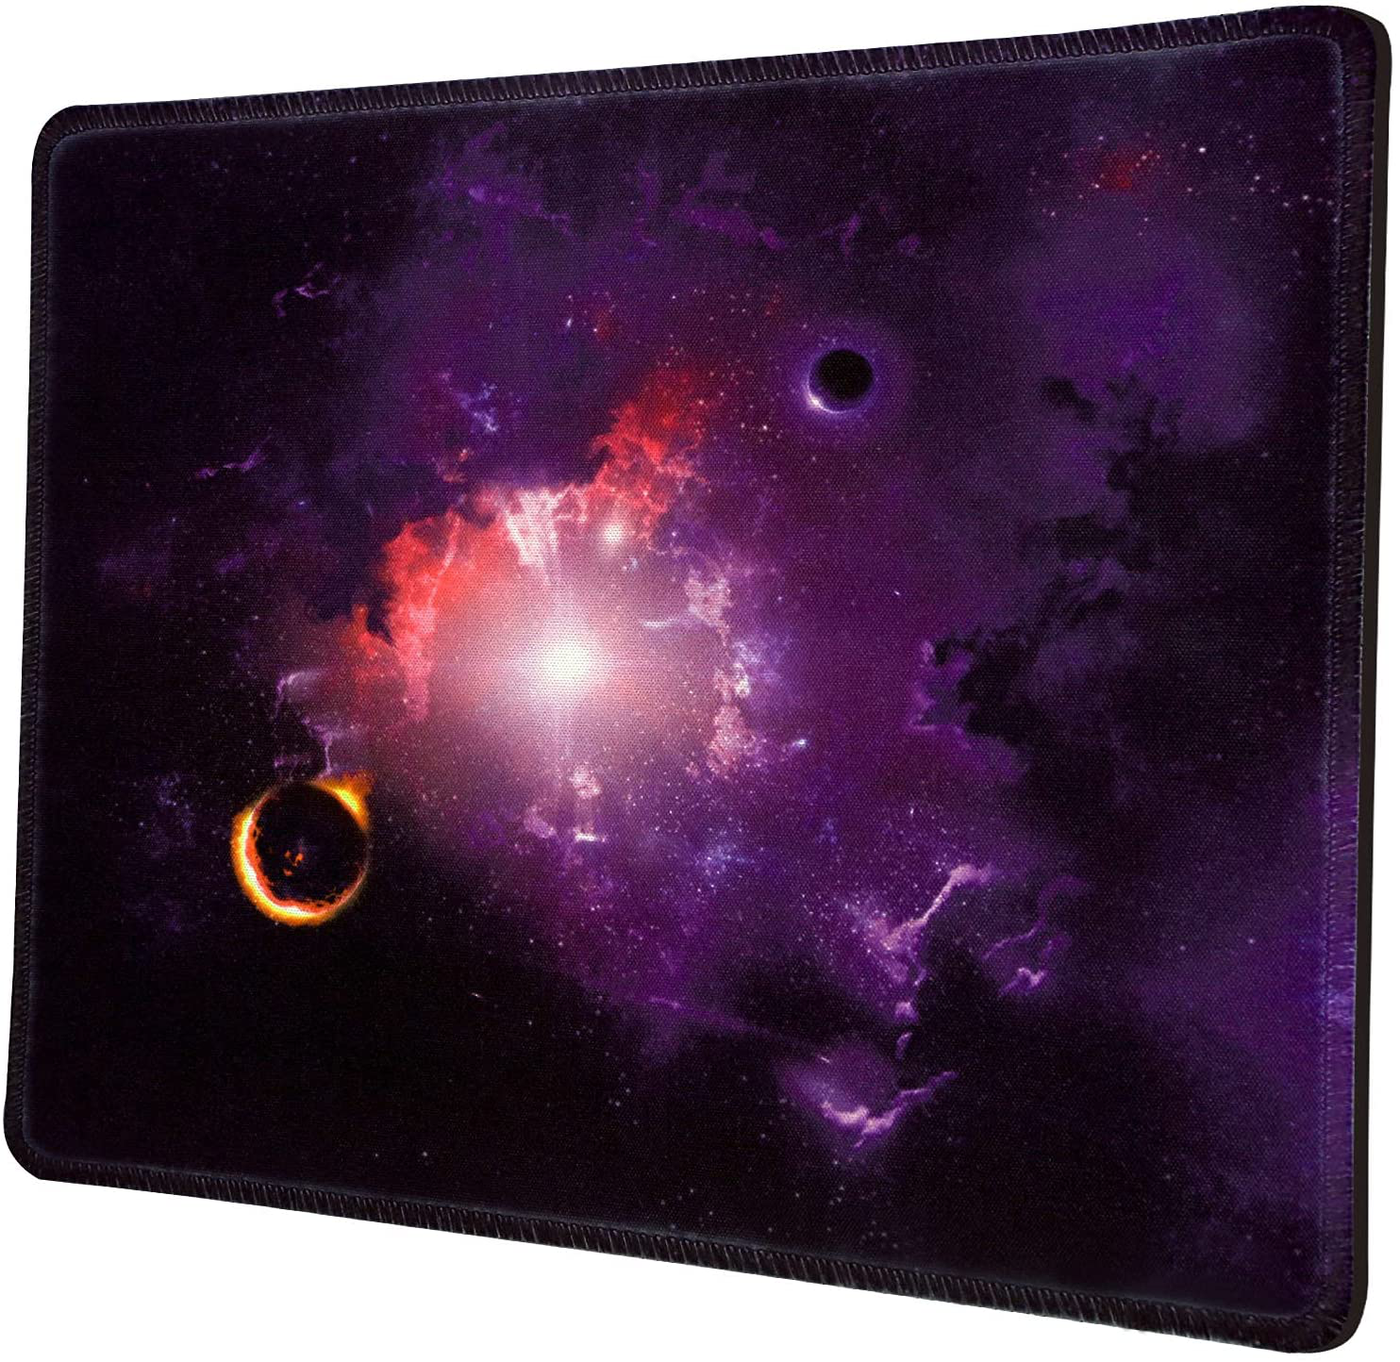 Galaxy Mouse Pads for Wireless Mouse,Farbiunu Rubber Mousepad,Stitched Edge & Washable. Mouse Mats for Computer,Laptop Accessory,Mousepads for Office Gaming Home.